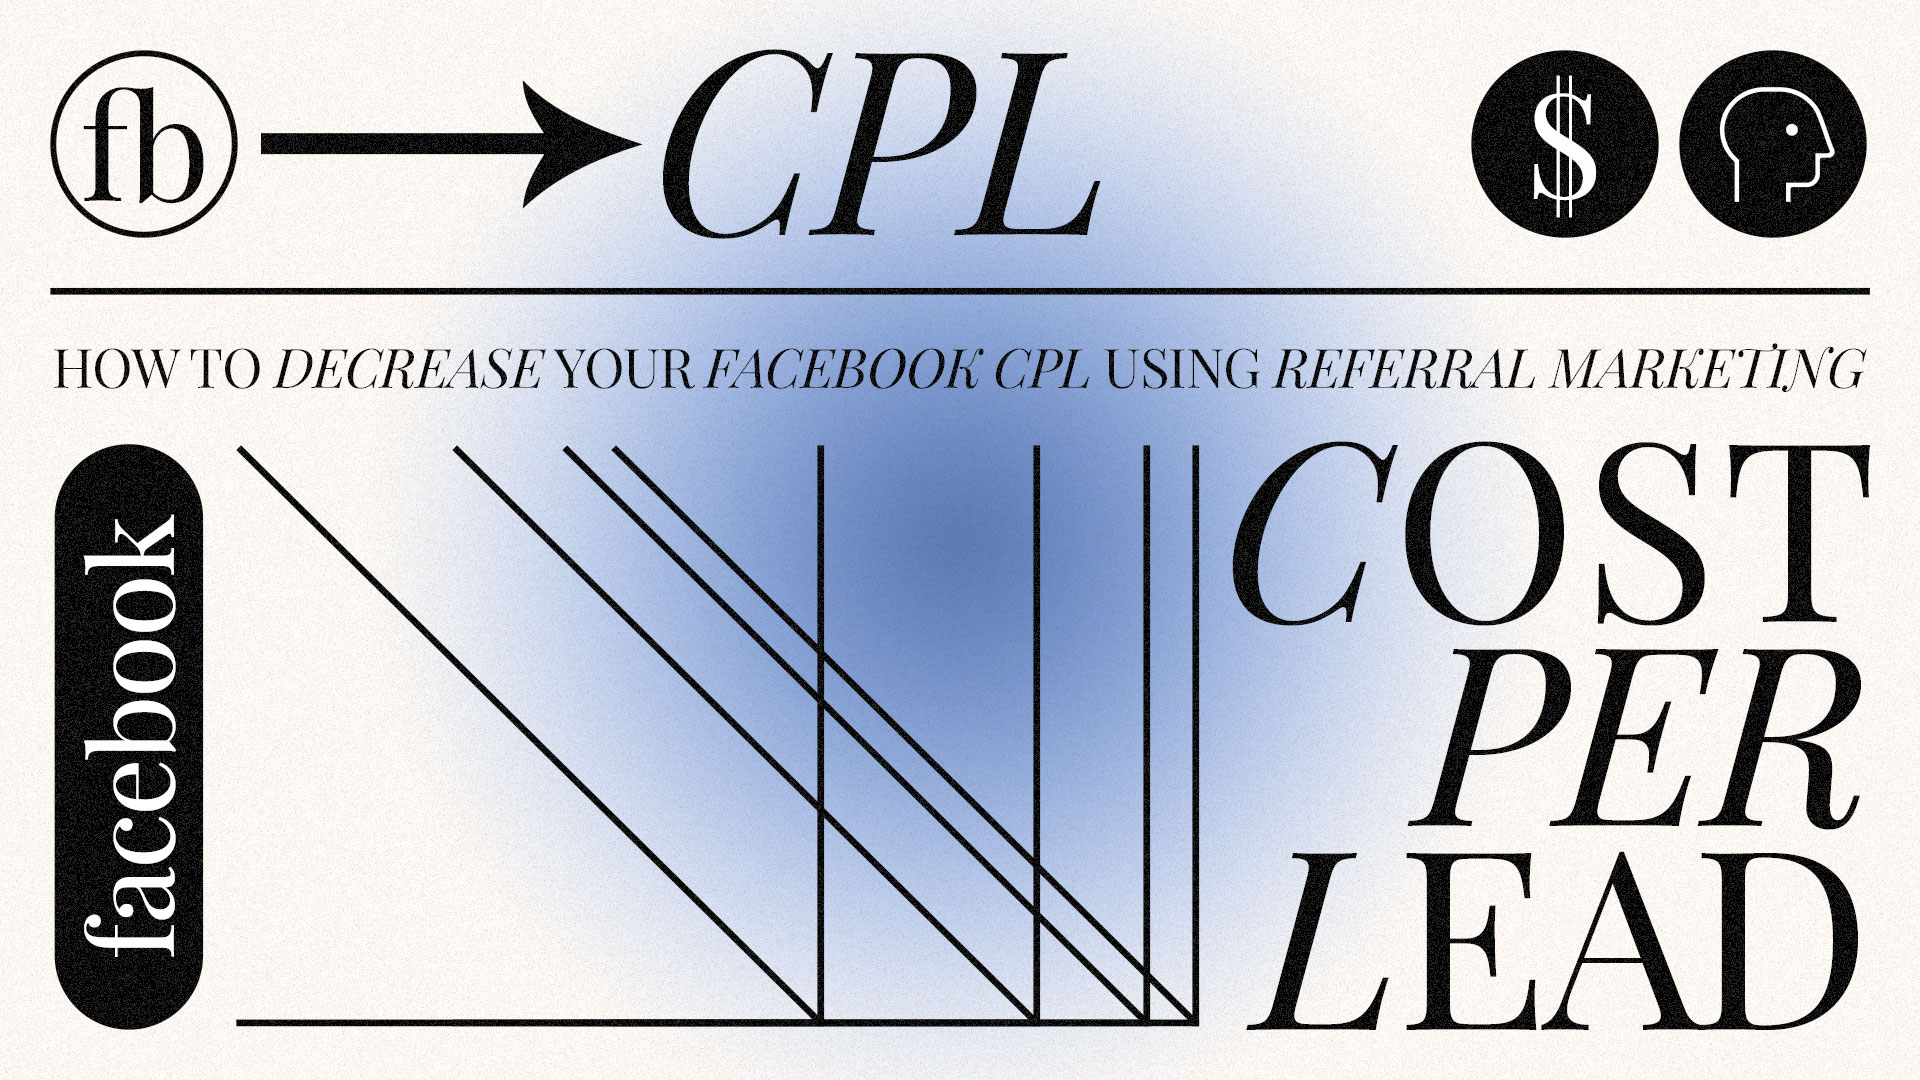 How to decrease facebook CPL with referral marketing